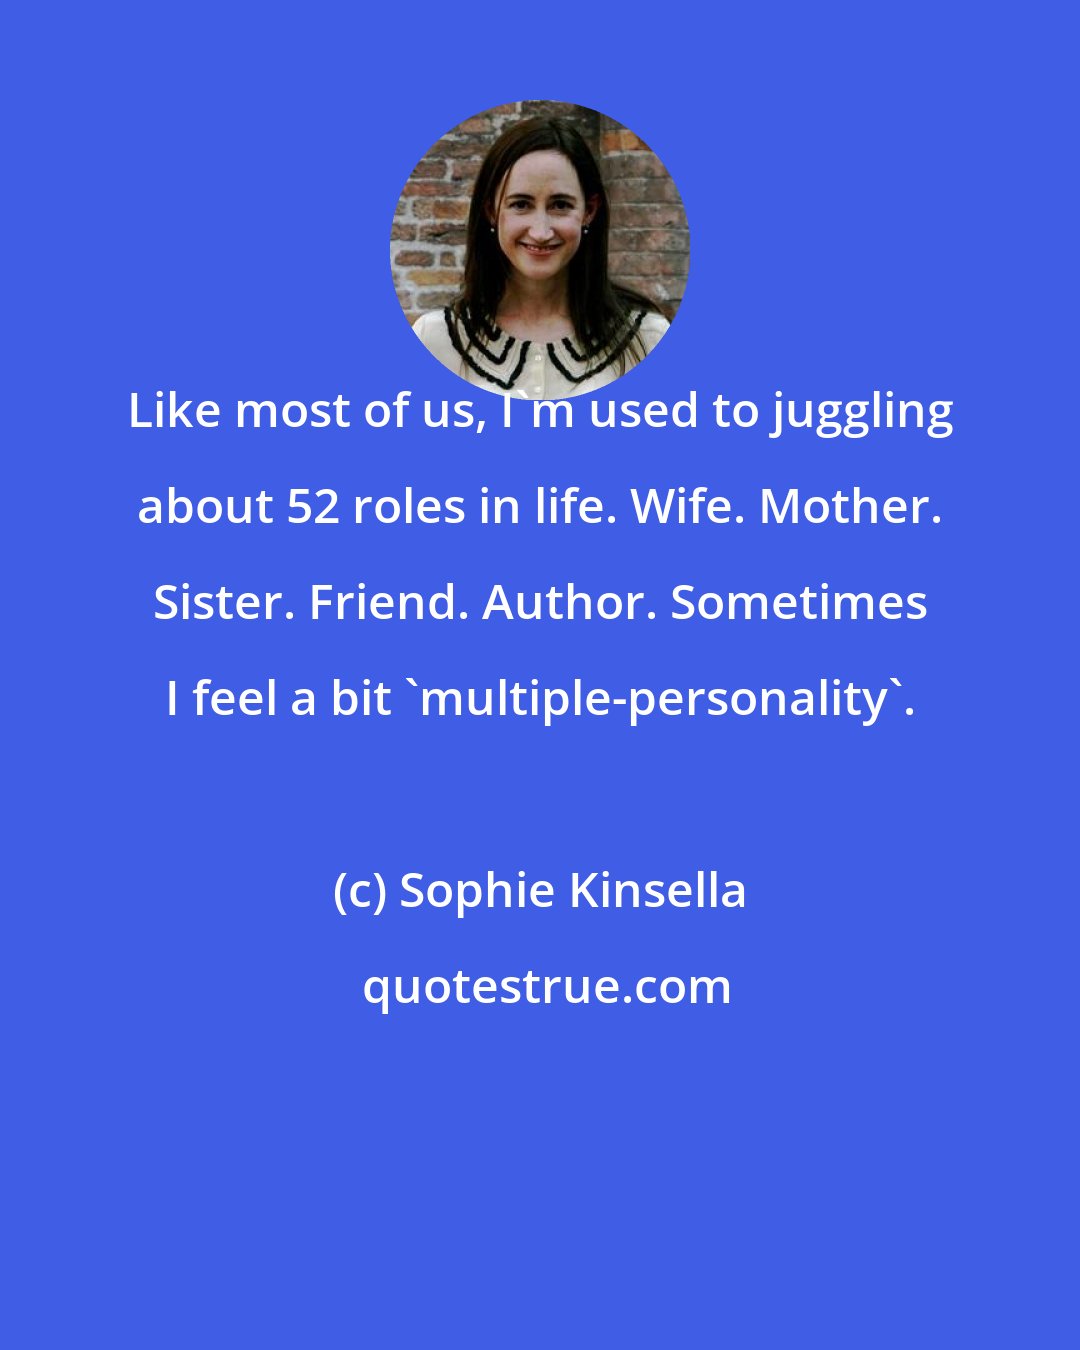 Sophie Kinsella: Like most of us, I'm used to juggling about 52 roles in life. Wife. Mother. Sister. Friend. Author. Sometimes I feel a bit 'multiple-personality'.